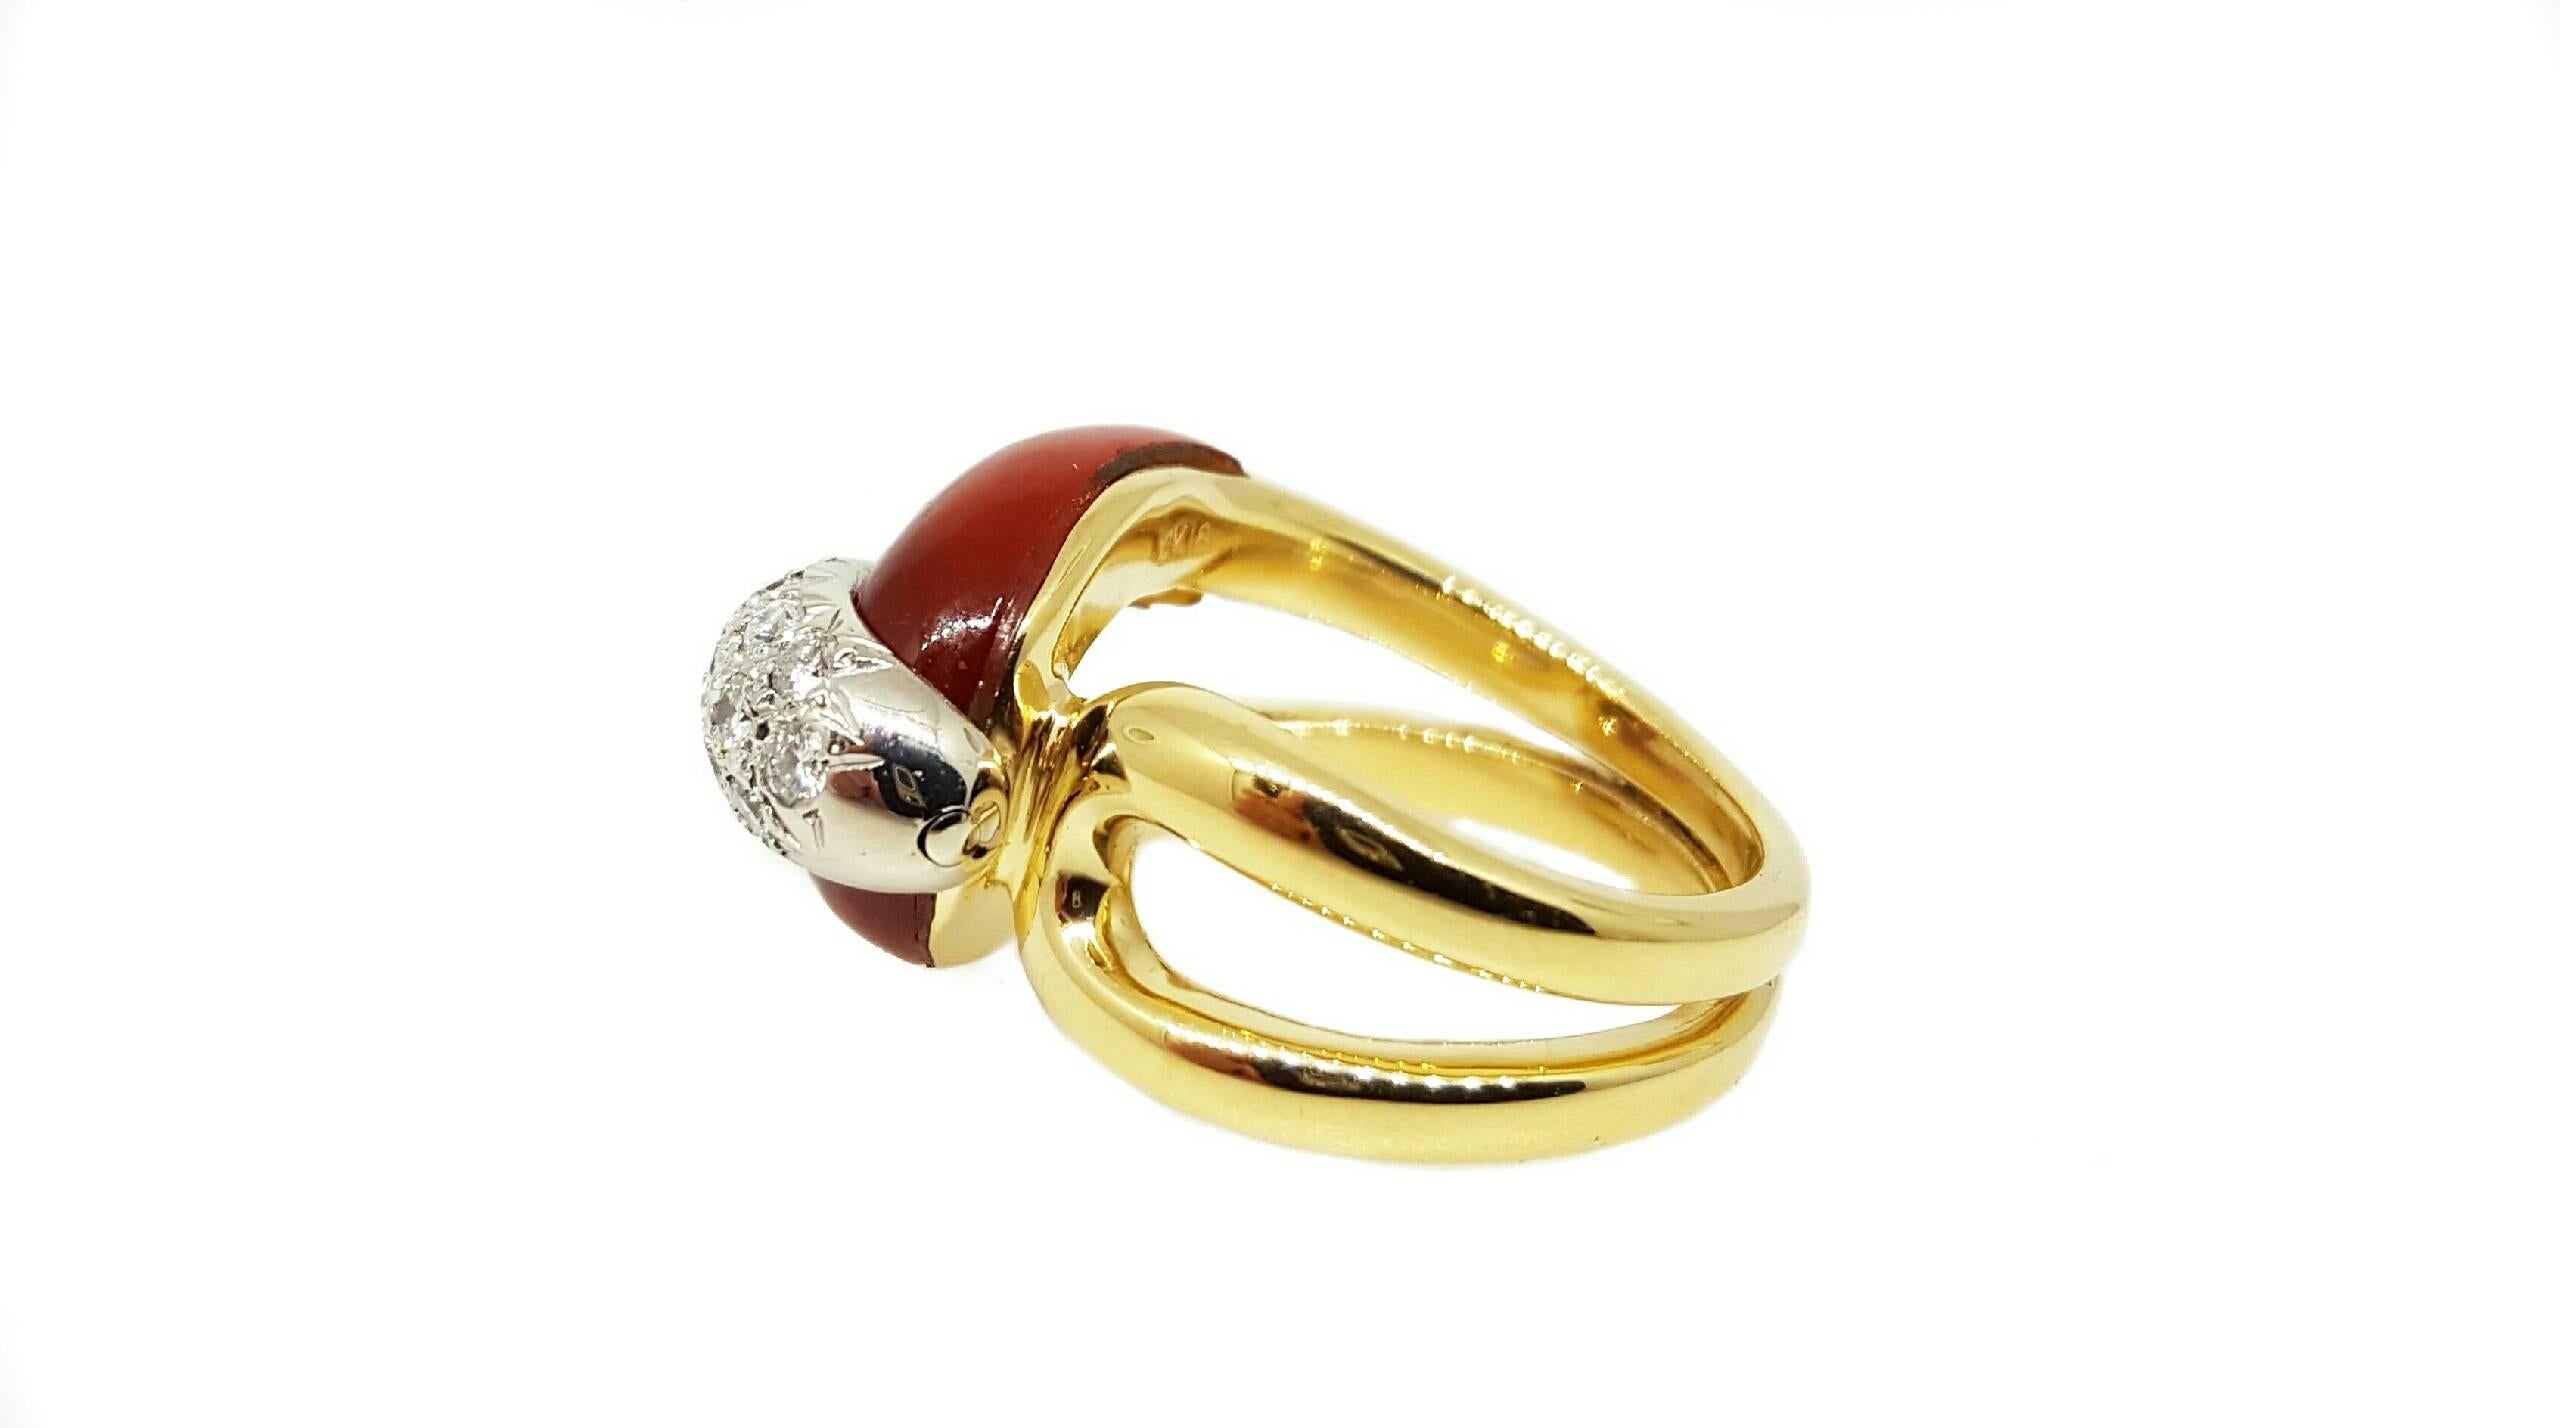 An 18 karat yellow gold ring inlaid with carnelian and bead set with round brilliant cut diamonds. There are a total of 16  diamonds that weigh approximately 0.45cttw. The ring is a 5.5 and can be resized.

A ring like this is hard to find in such